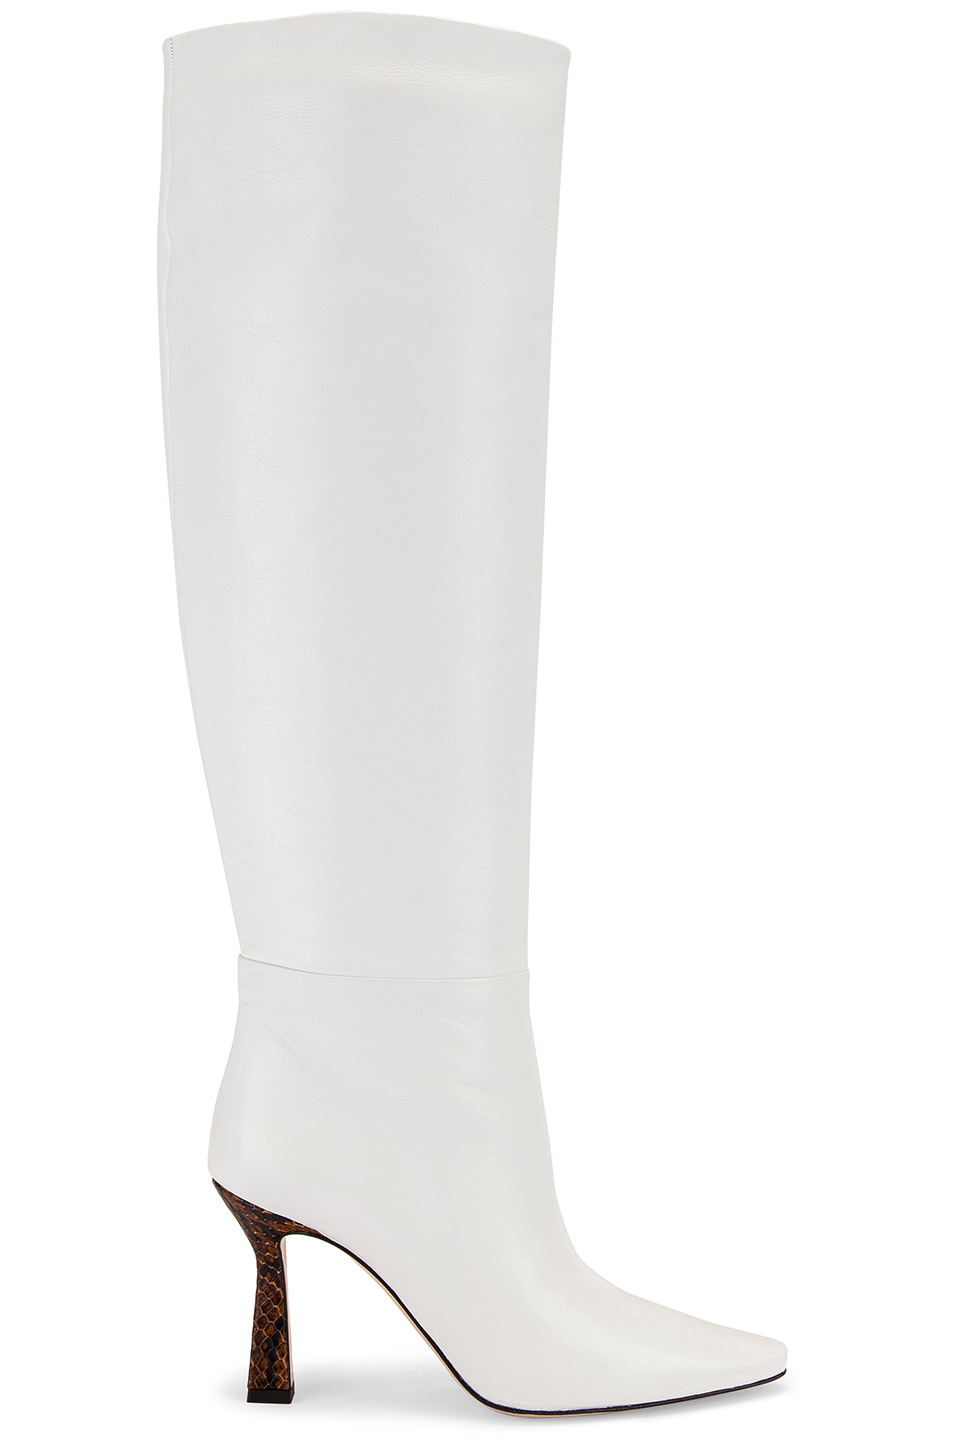 Image 1 of Wandler Lina Long Boots in White & Python Tan